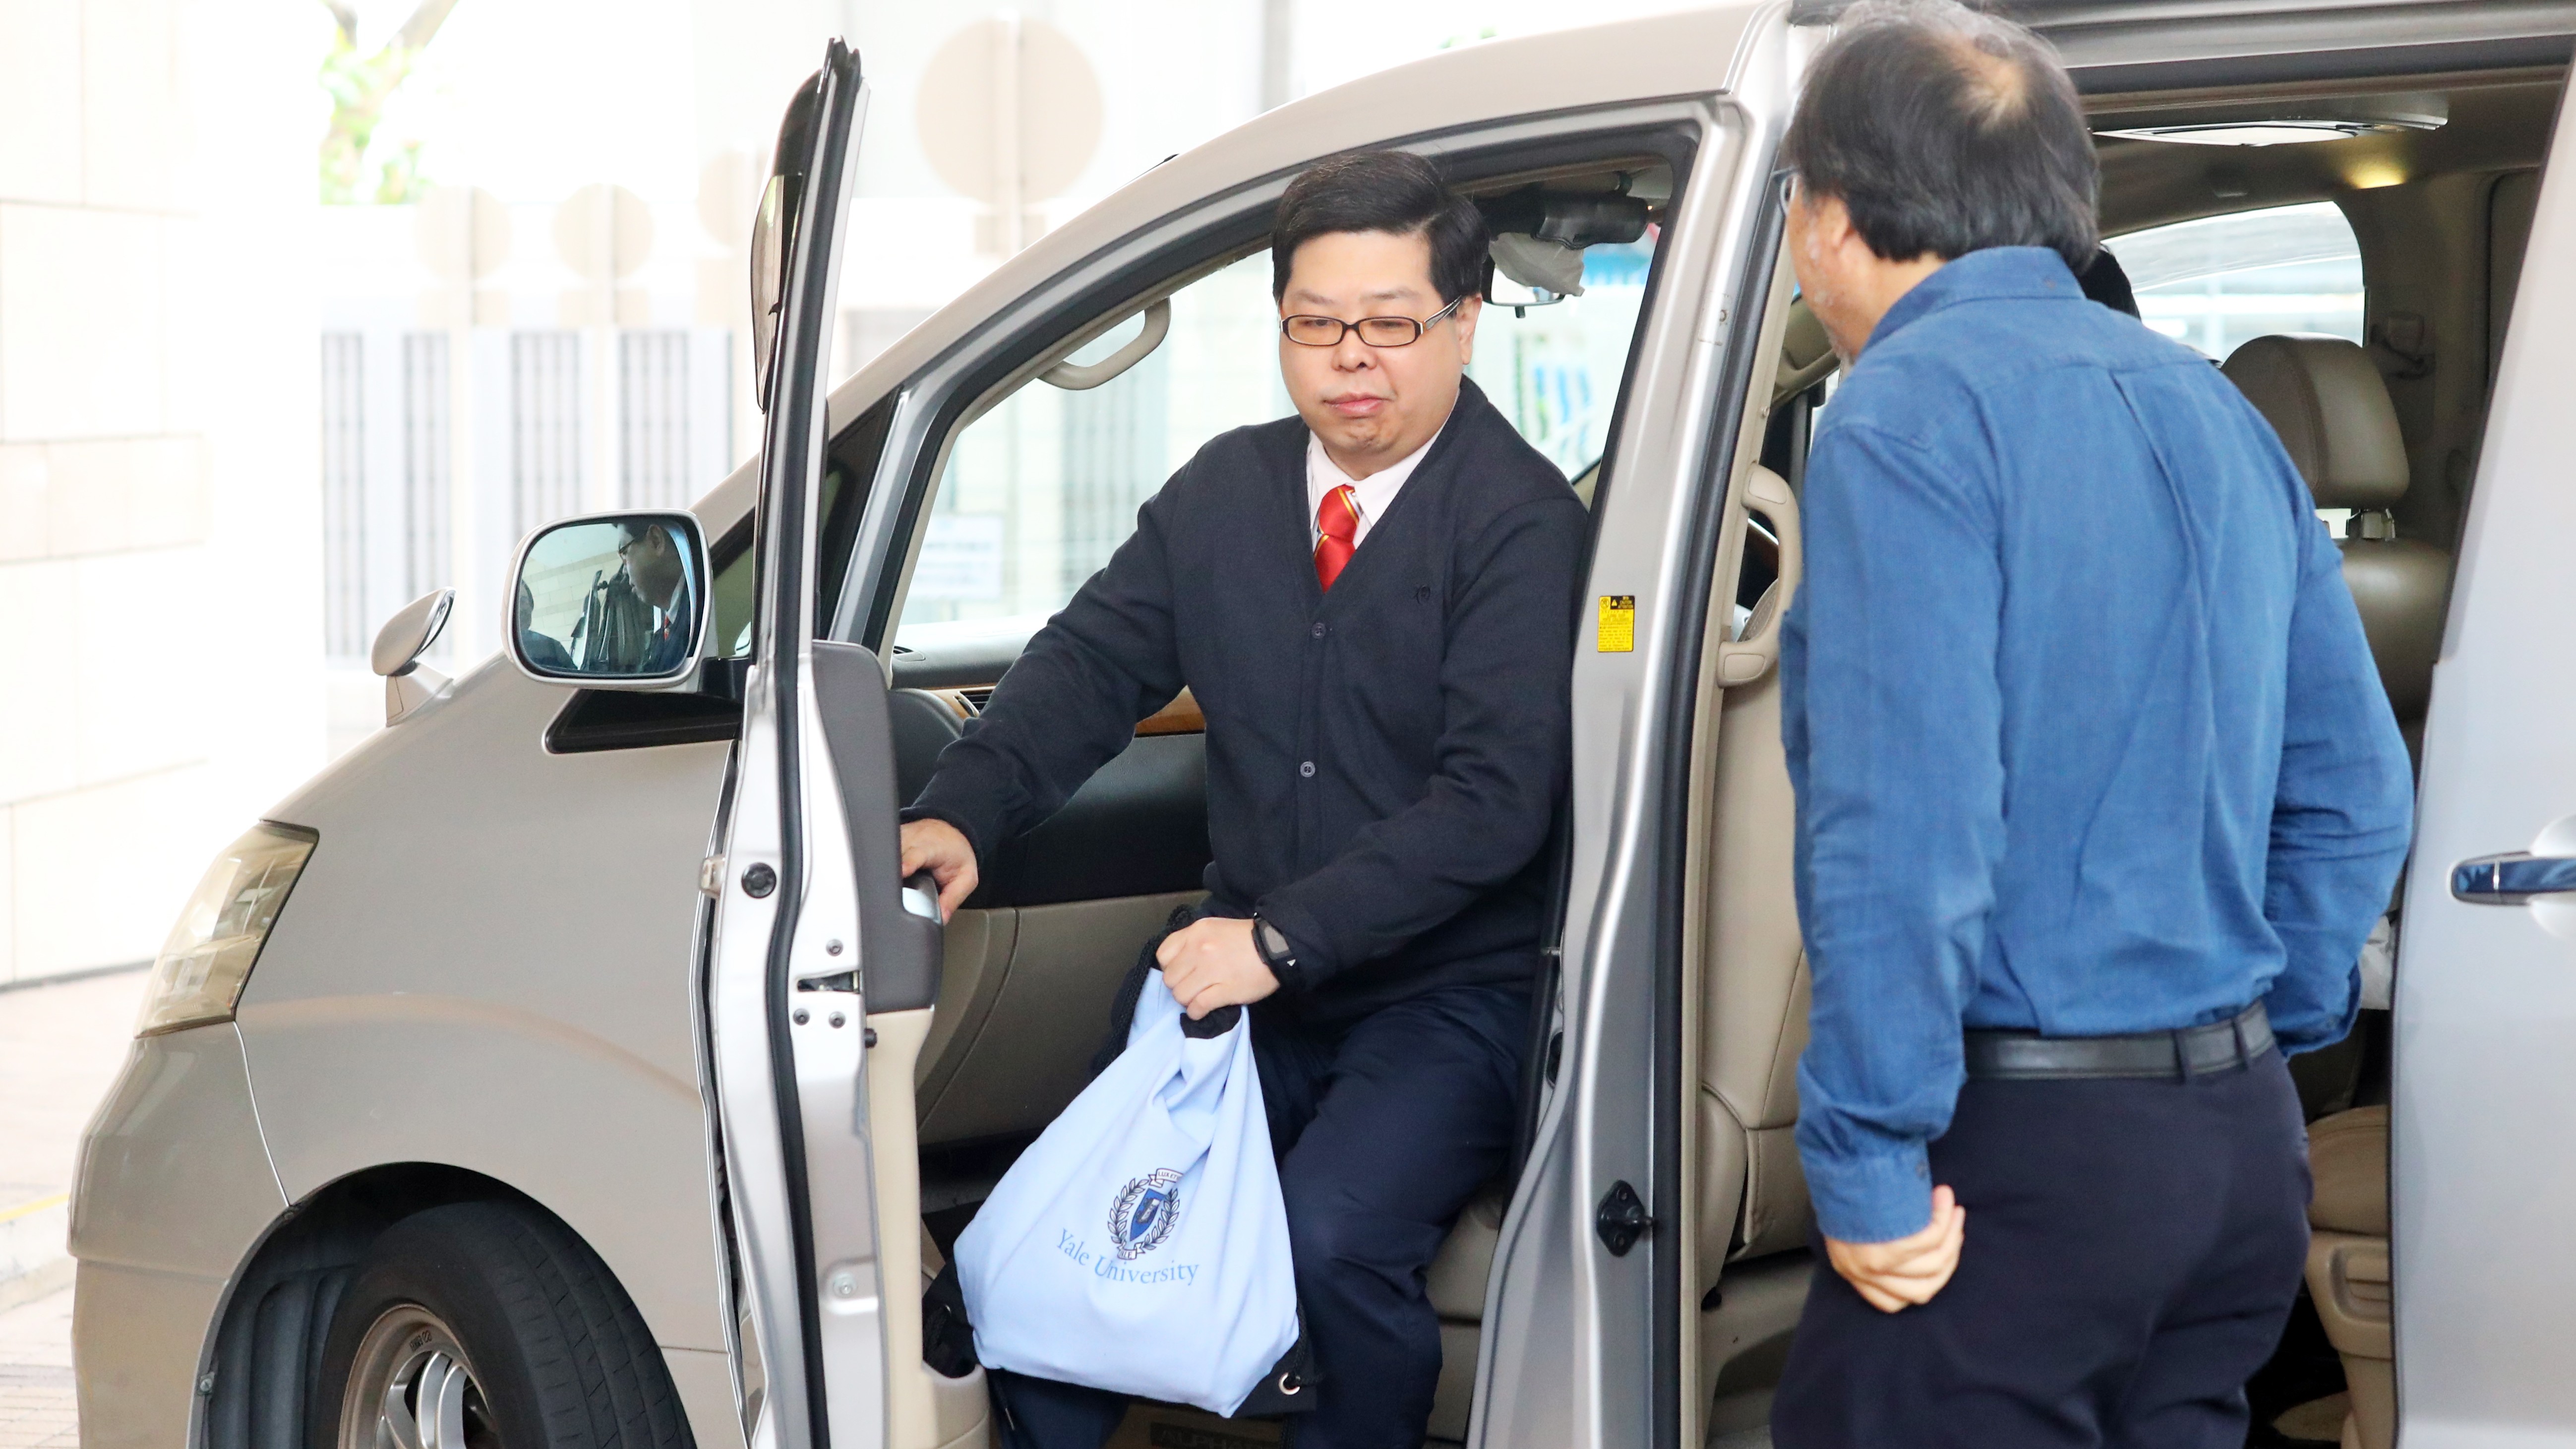 Howard Lam arrives at West Kowloon Court in Sham Shui Po. Lam was charged with misleading police after his kidnap story unravelled during their hunt for evidence. Photo: Edmond So